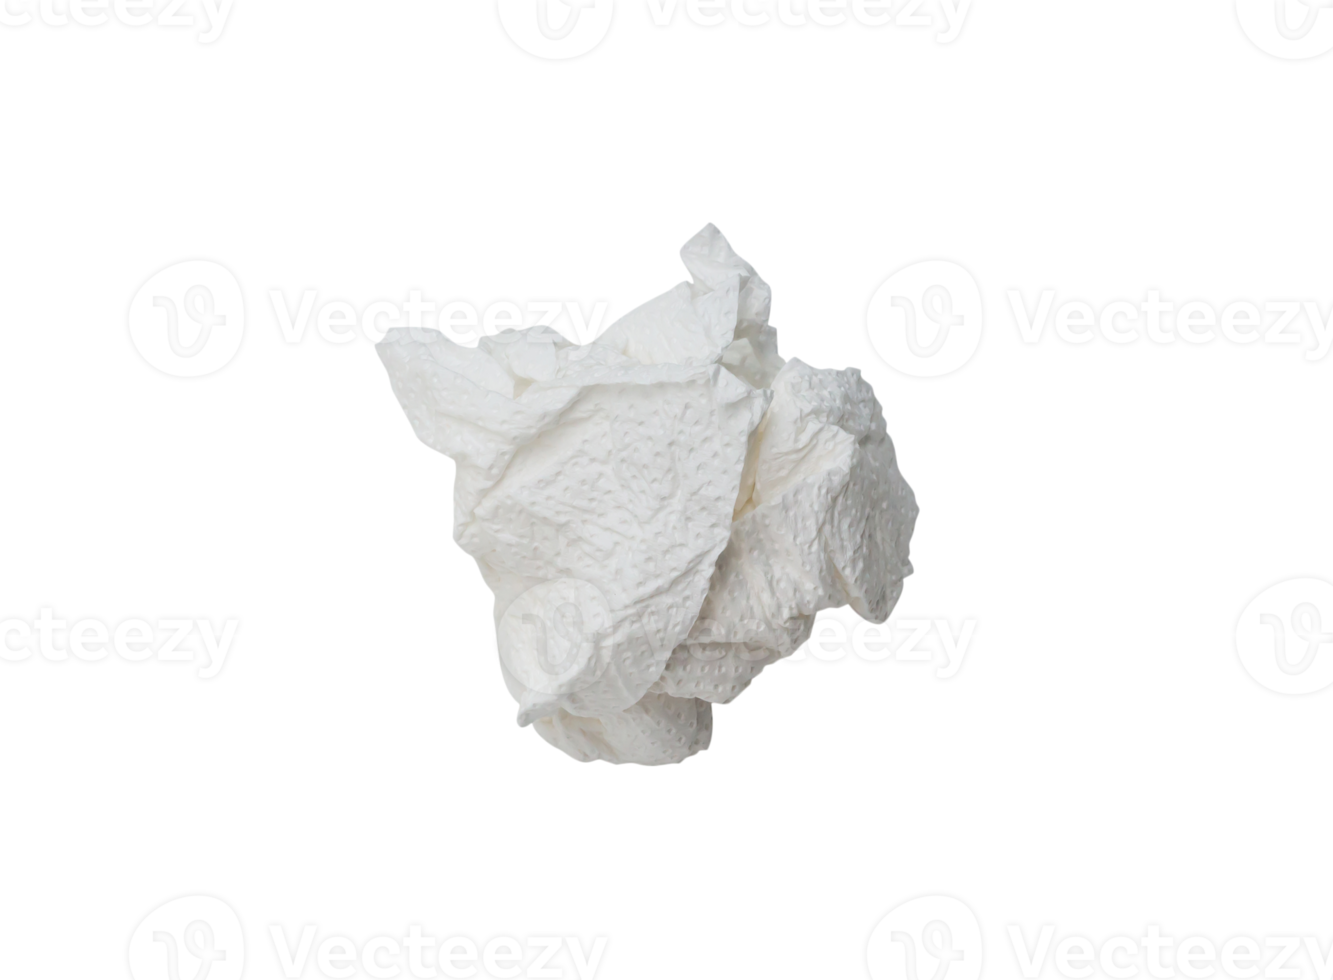 Single screwed or crumpled tissue paper or napkin in strange shape after use in toilet or restroom isolated with clipping path in png format